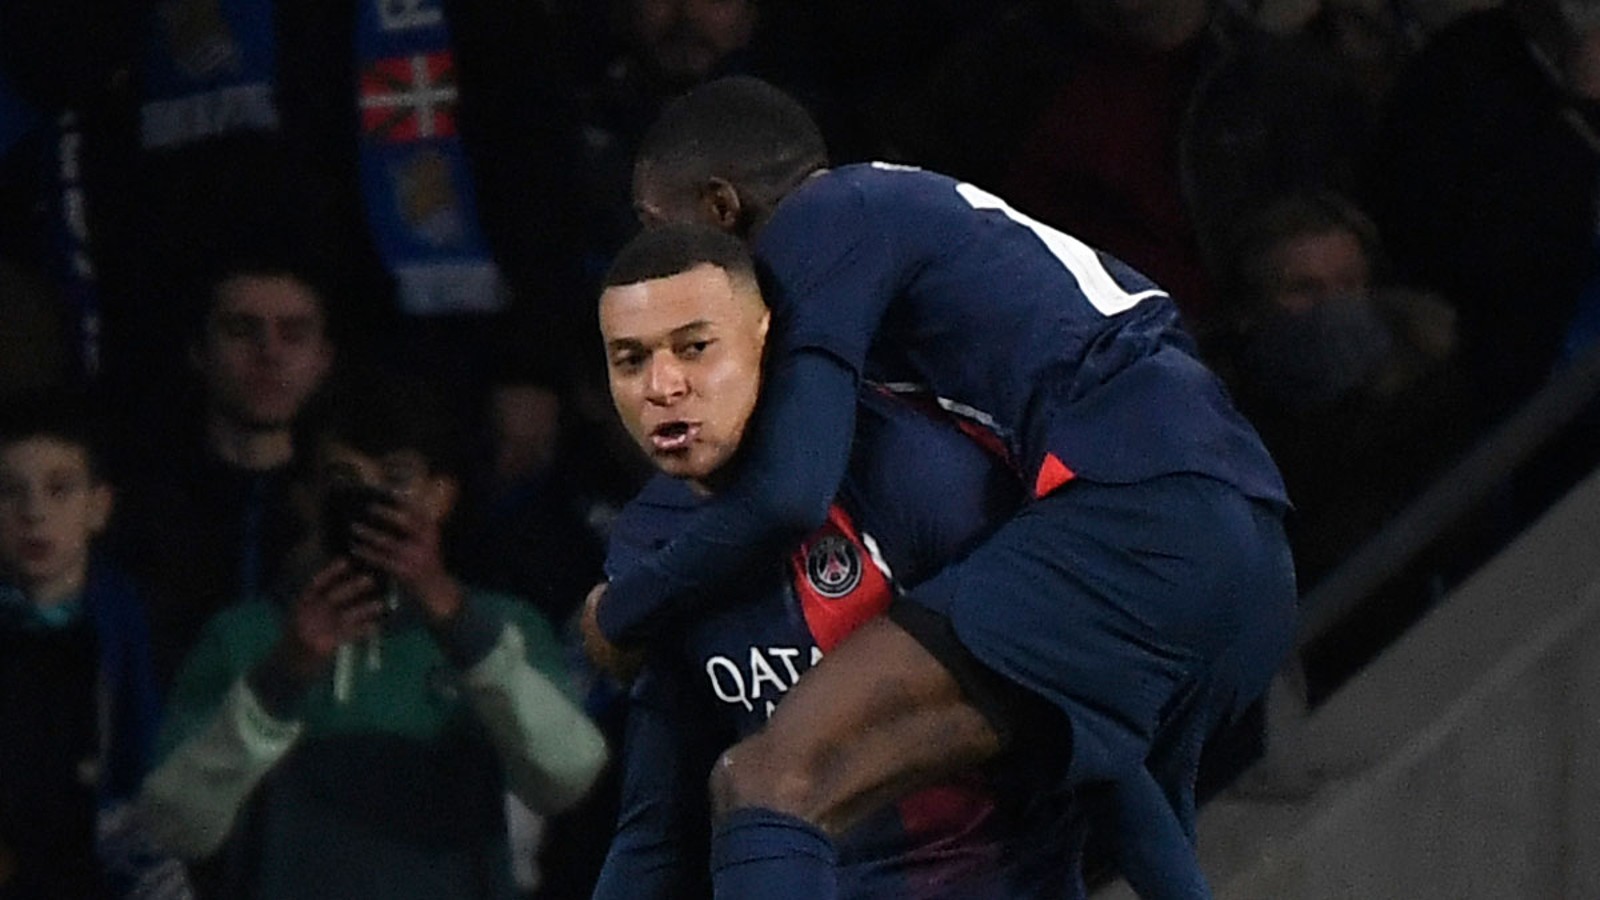 Thanks again to Kylian Mbappe!  Paris confidently in the quarter-finals